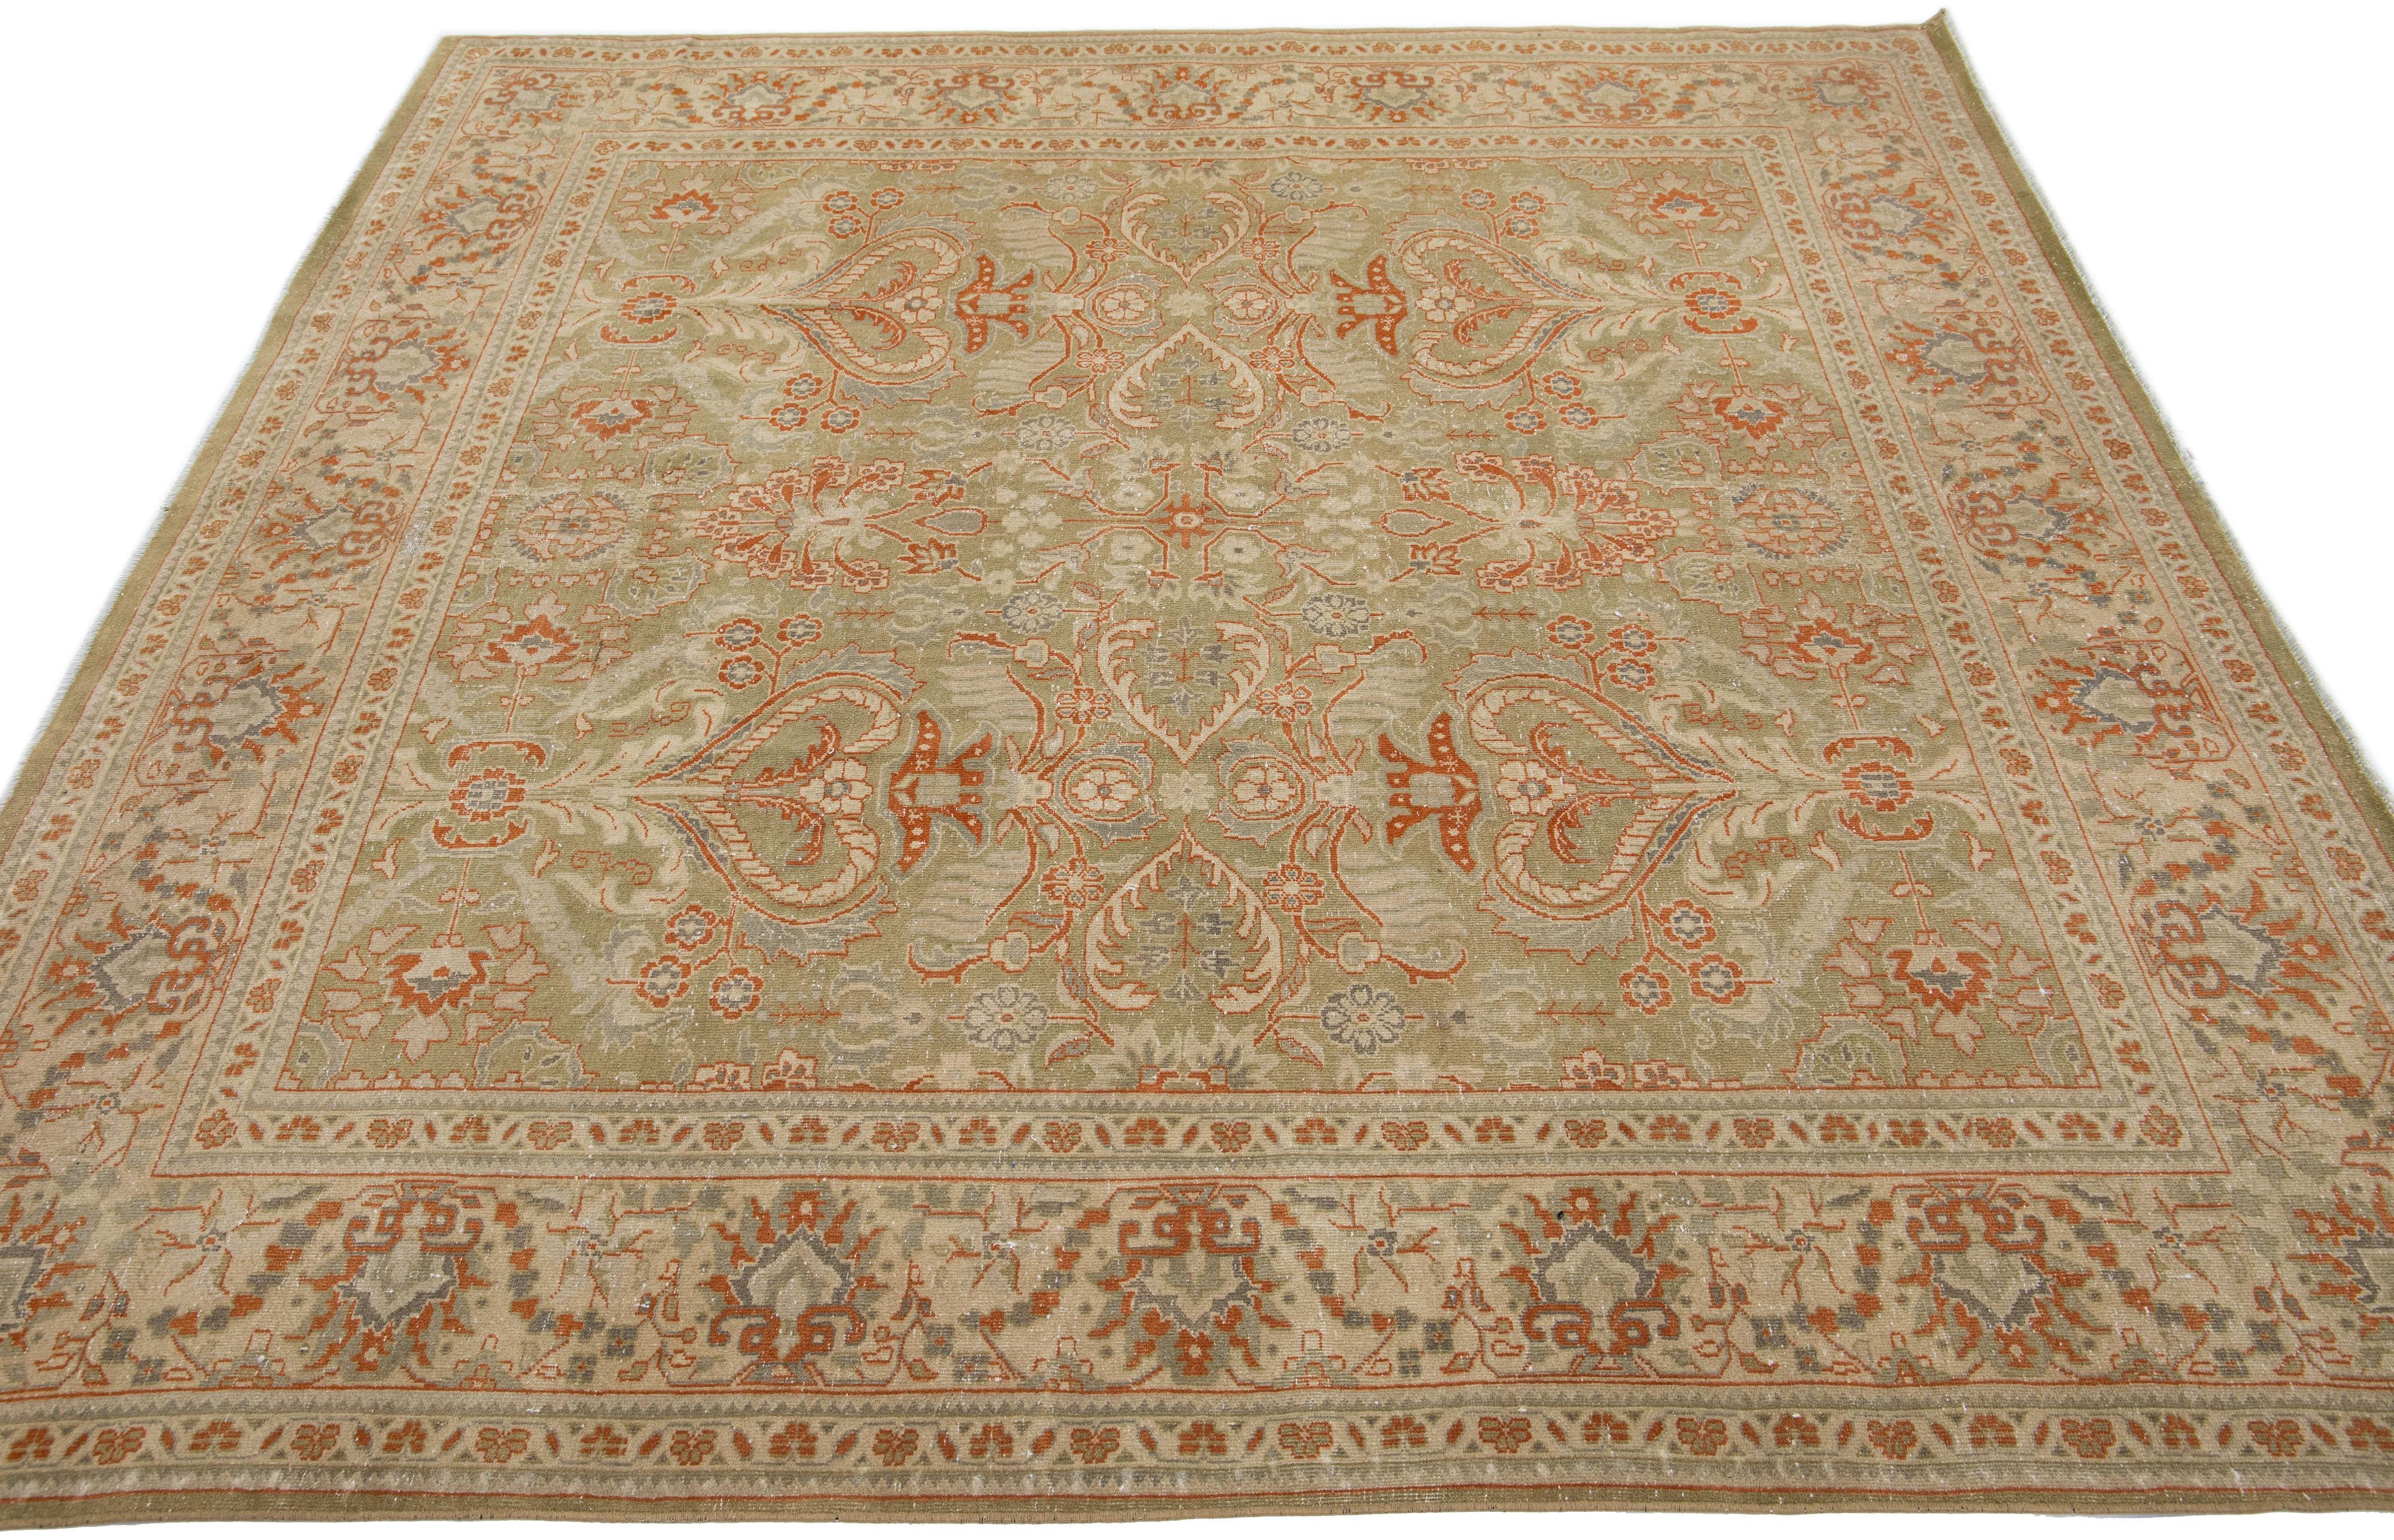 20th Century Green Antique Persian Mahal Handmade Square Wool Rug with Allover Floral Design For Sale